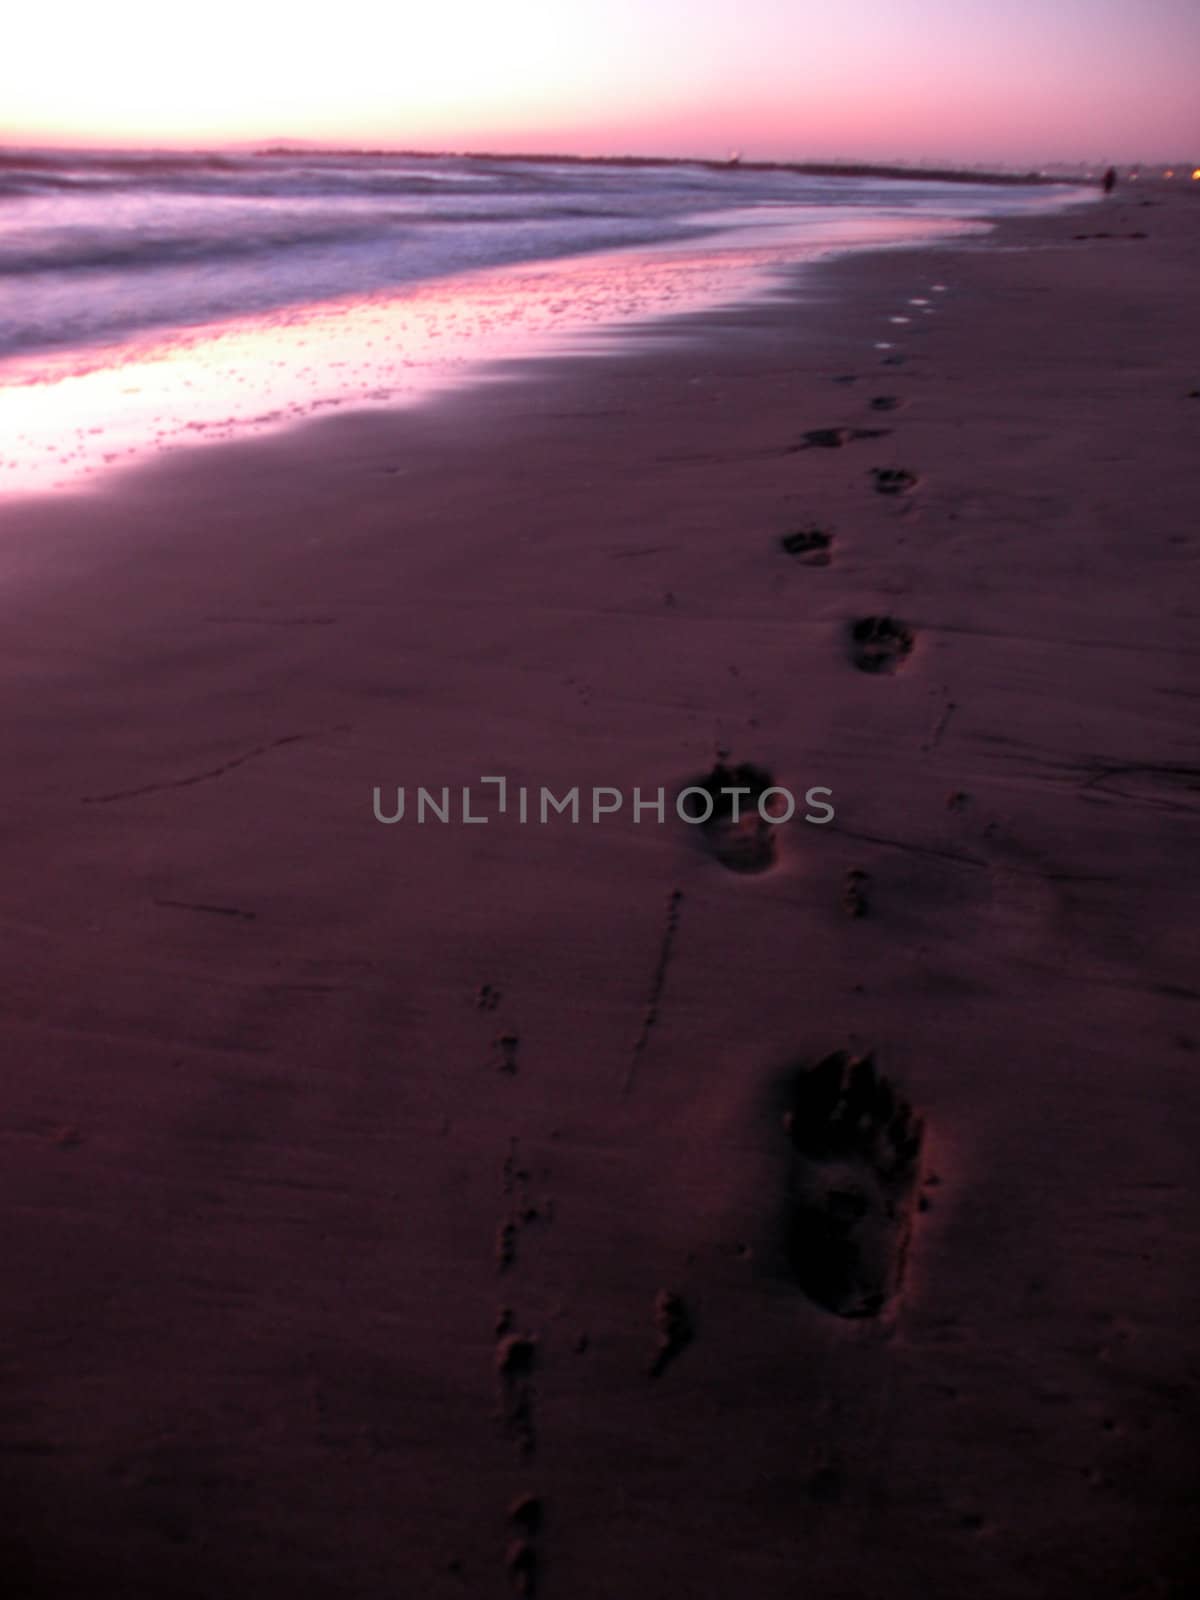 footprints in the sand, at the beach, at sunset